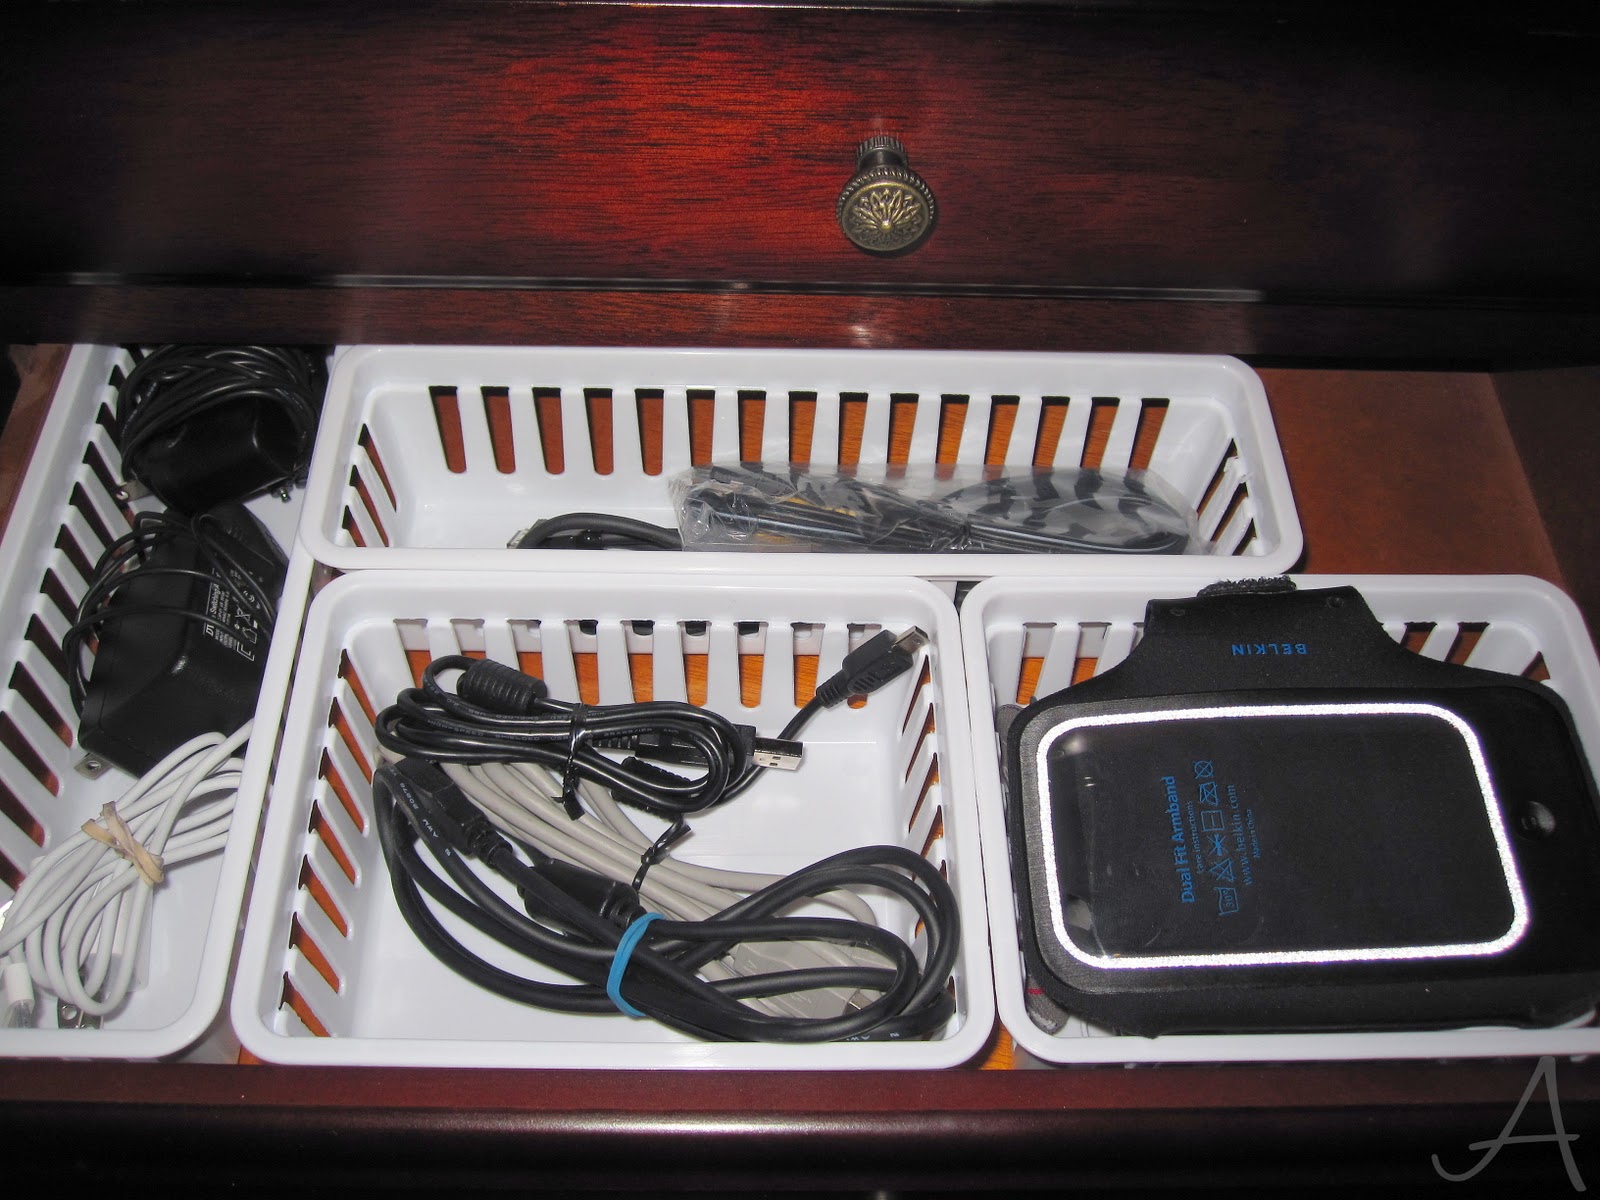 Day #11: How to Organize Cords & Chargers